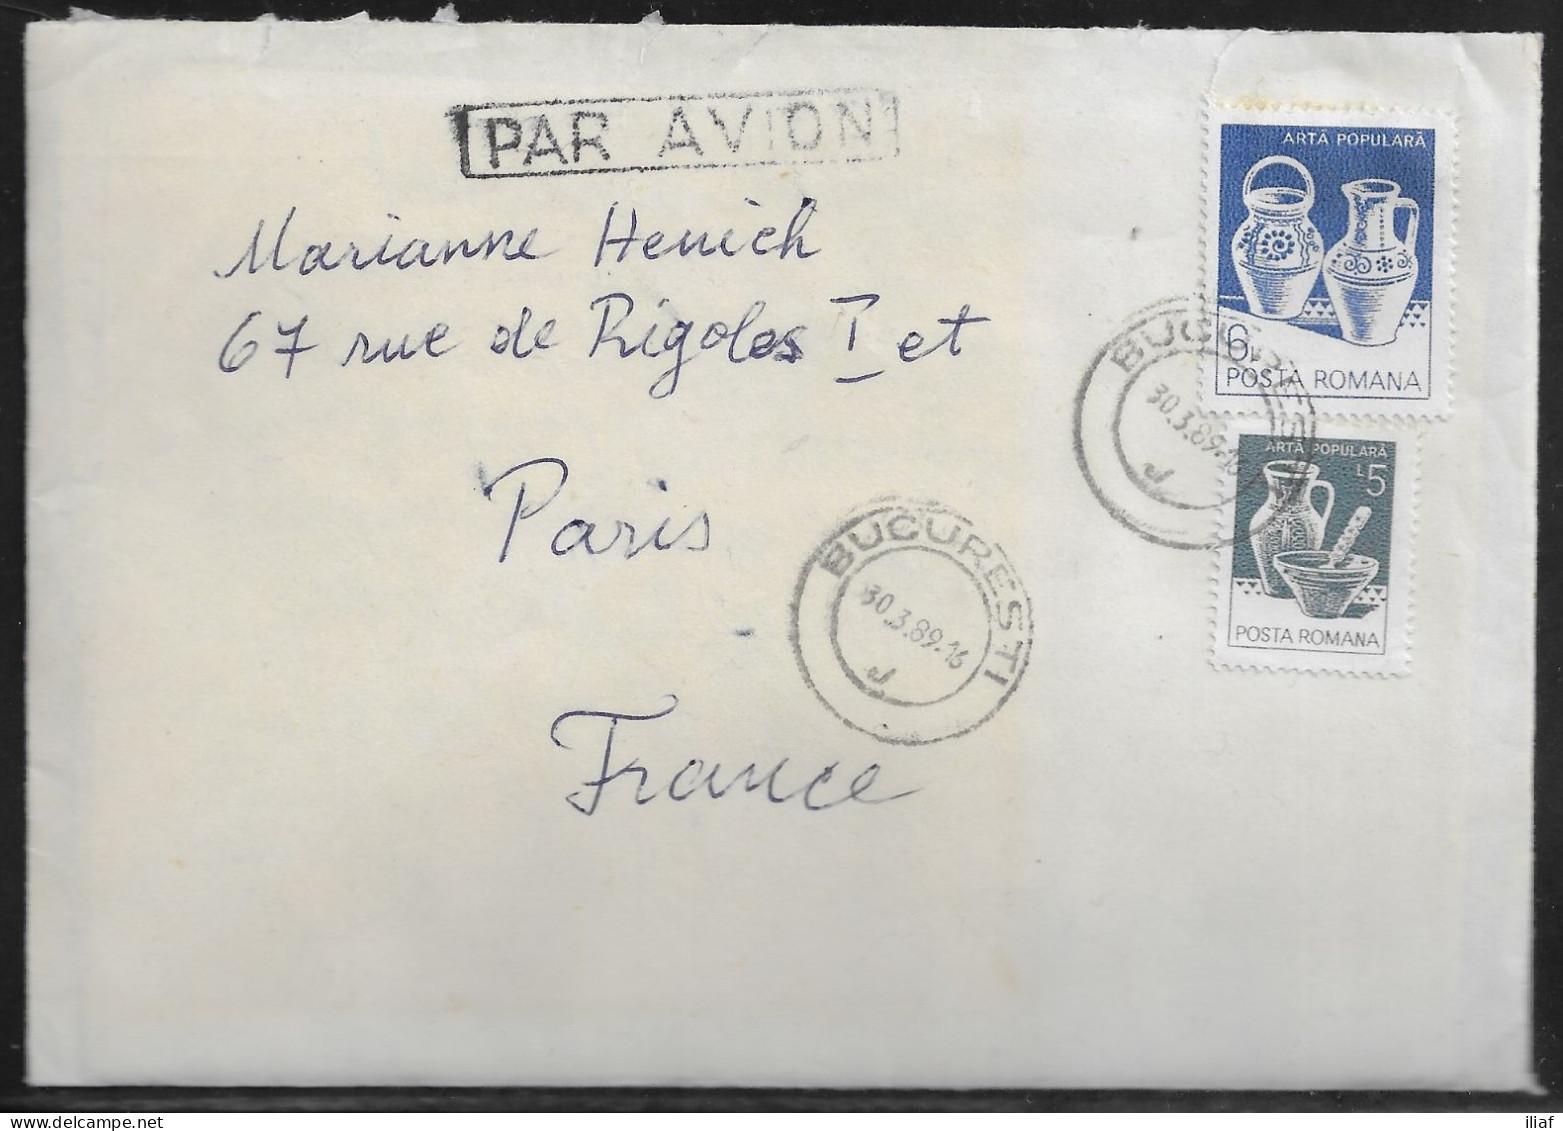 Romania. Stamps Sc. 3109-3110 On Air Mail Letter, Sent From Bucharest On 30.03.1989 To France. Letter Inside - Briefe U. Dokumente